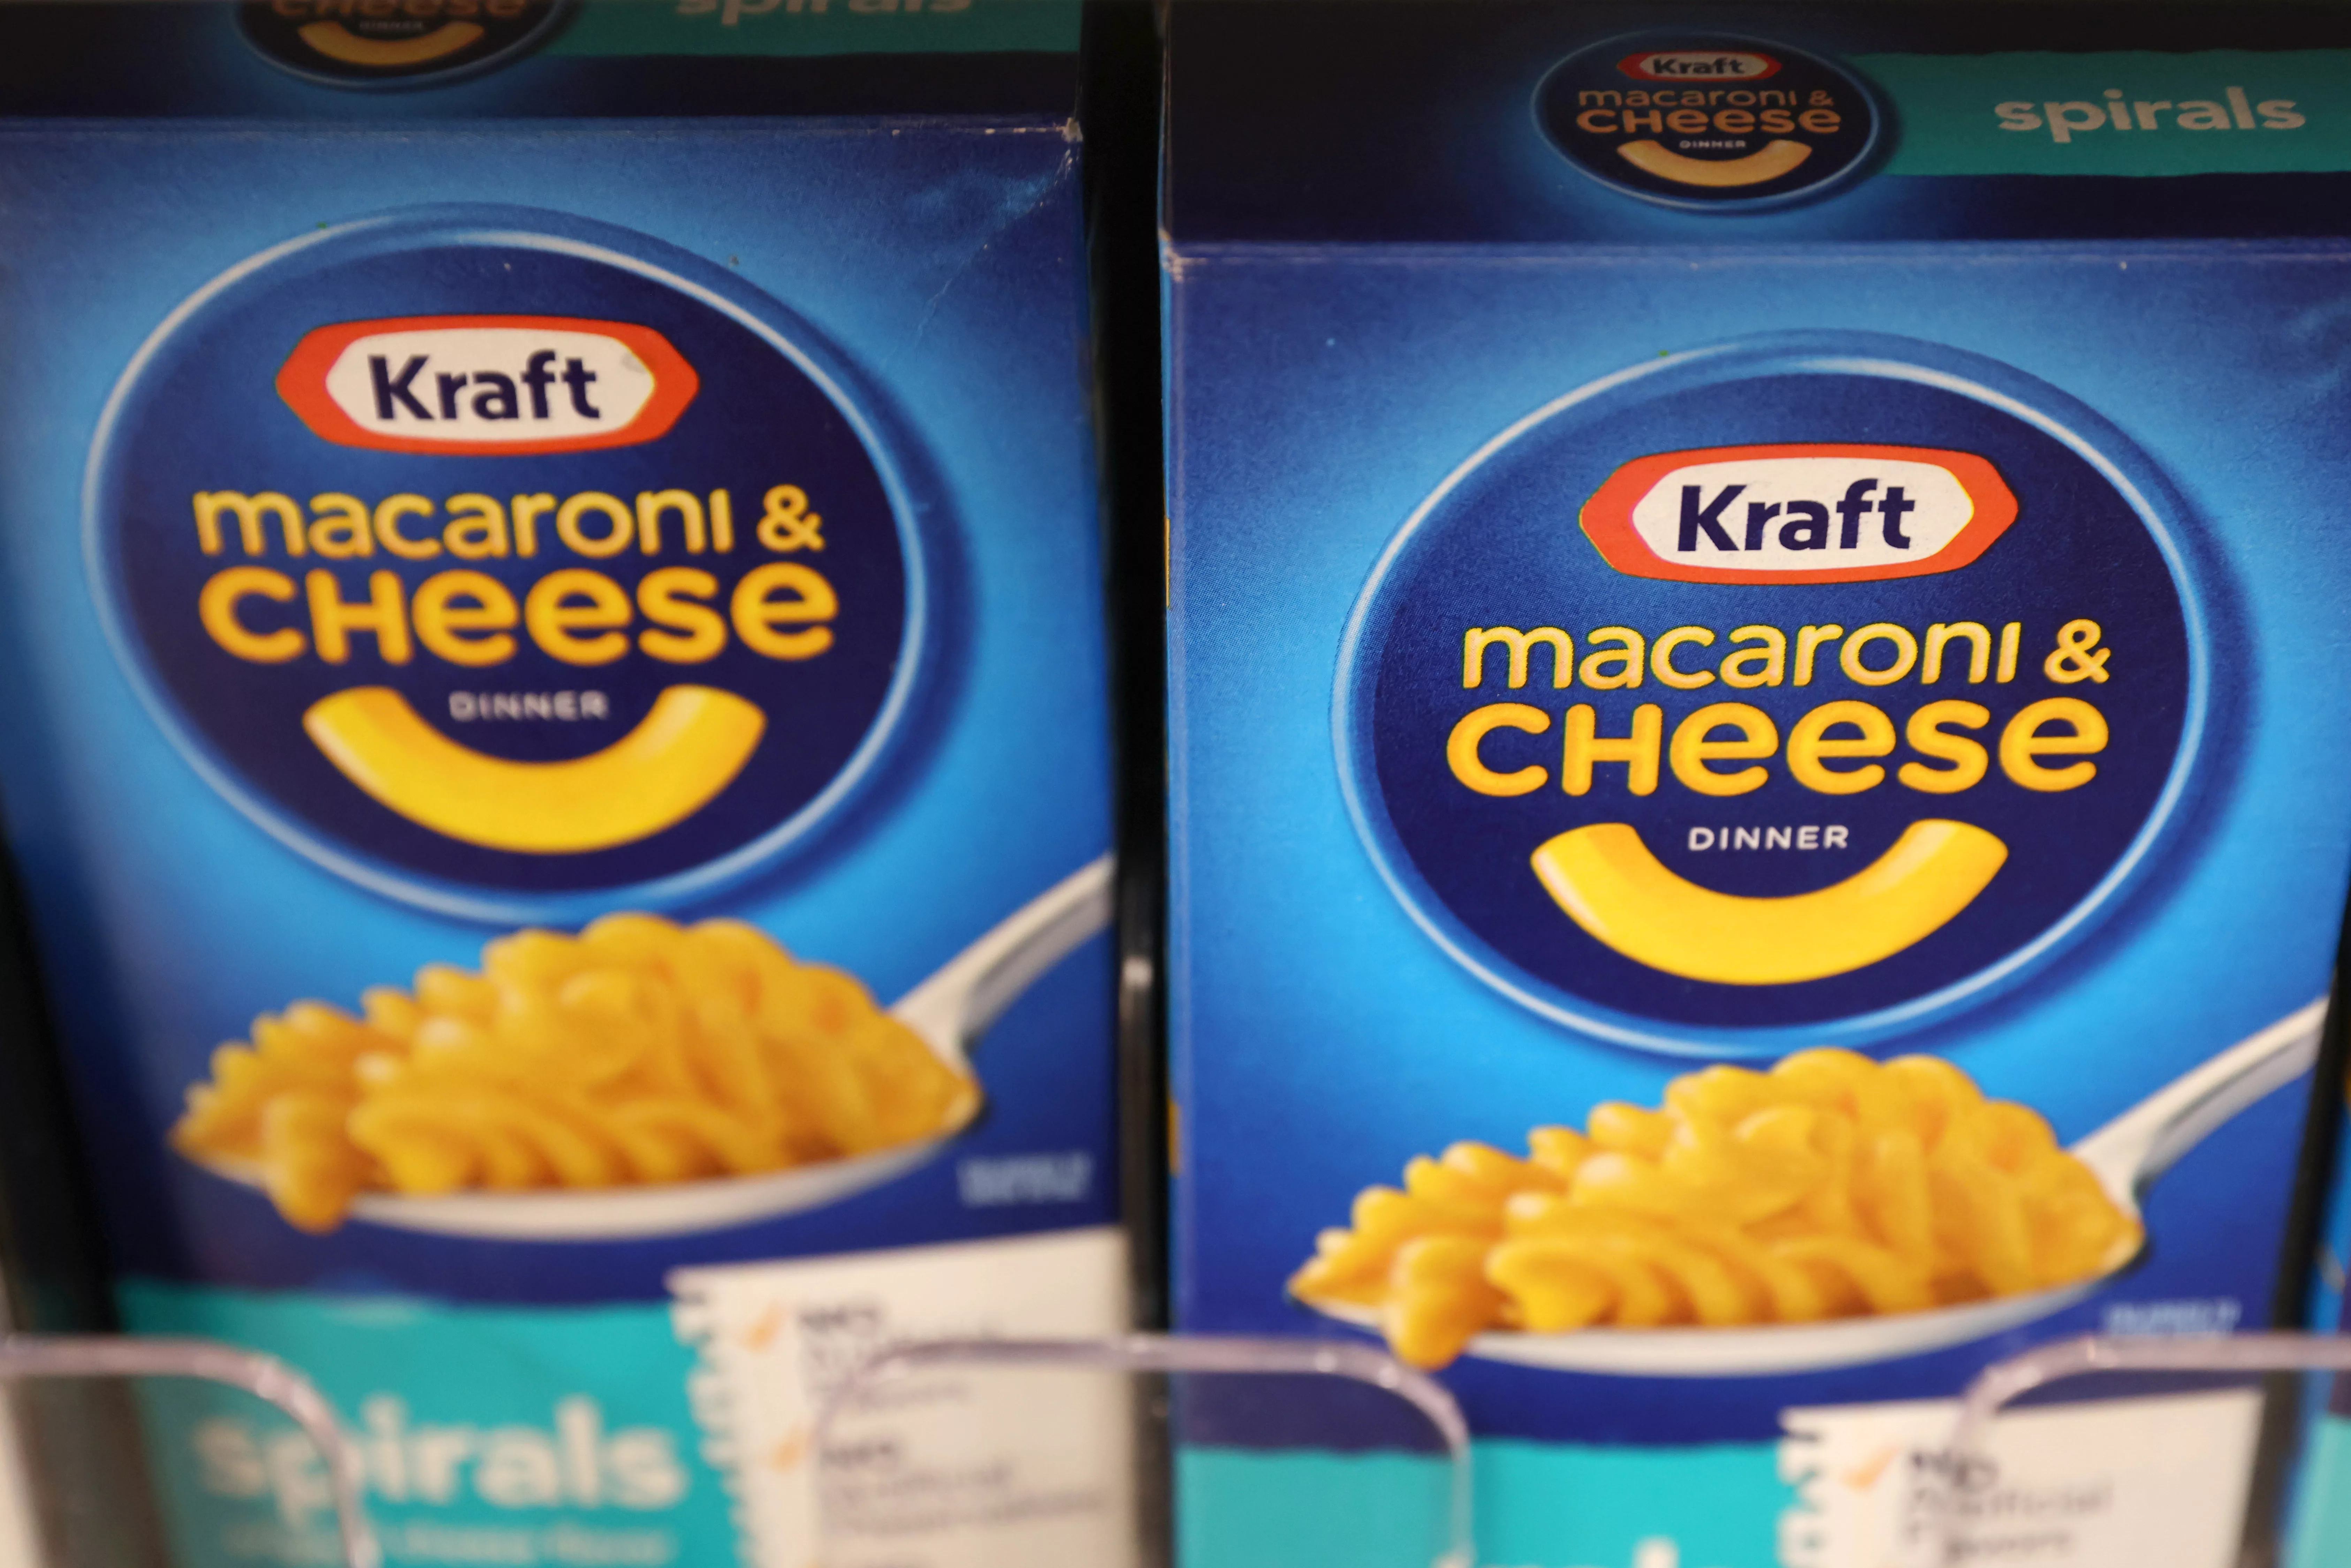 packages-of-kraft-macaroni-cheese-a-brand-owned-by-the-kraft-heinz-company-are-seen-in-a-store-in-manhattan-new-york